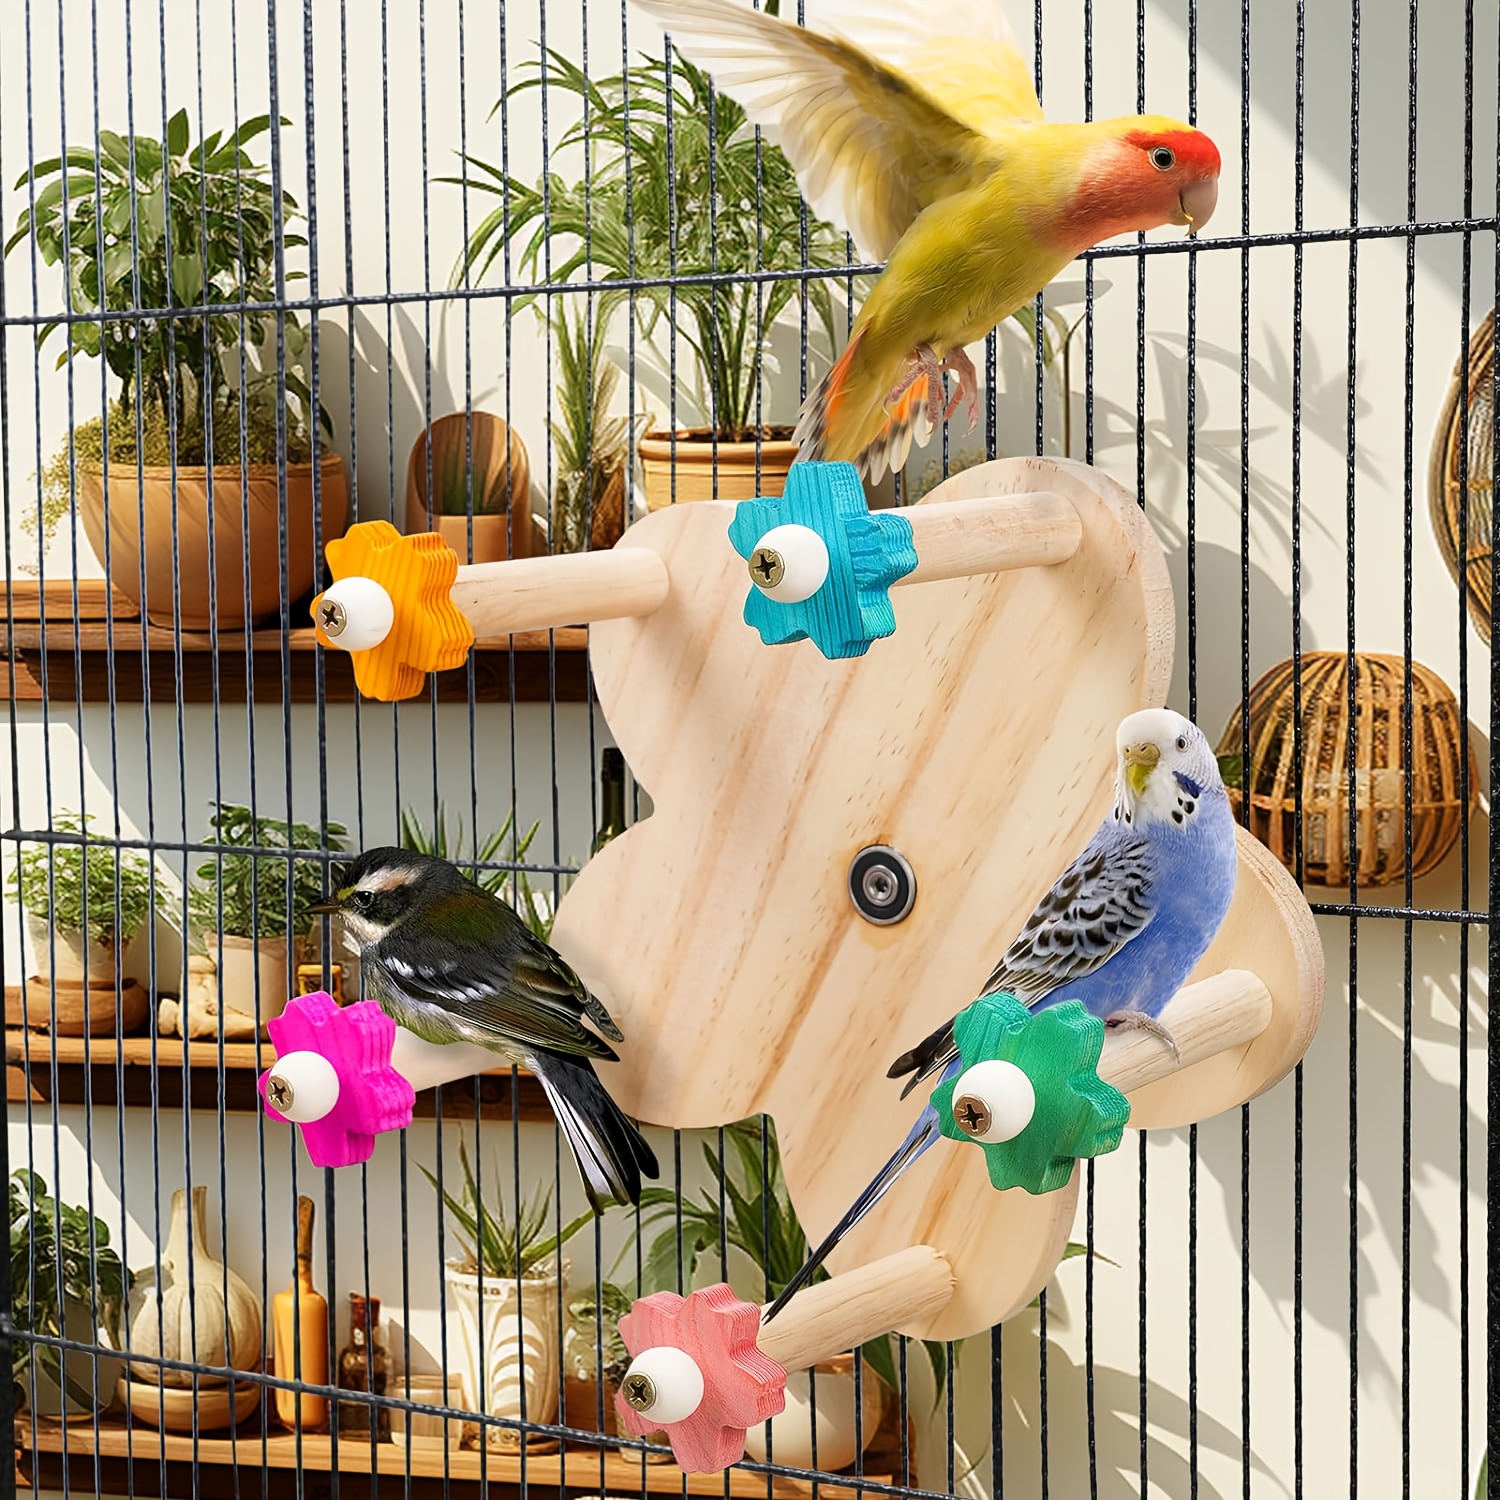 

1pc Wooden Parrot Bird Toy With Rotating Wheel And Bearing, Durable Play Stand Perch For Cage Entertainment